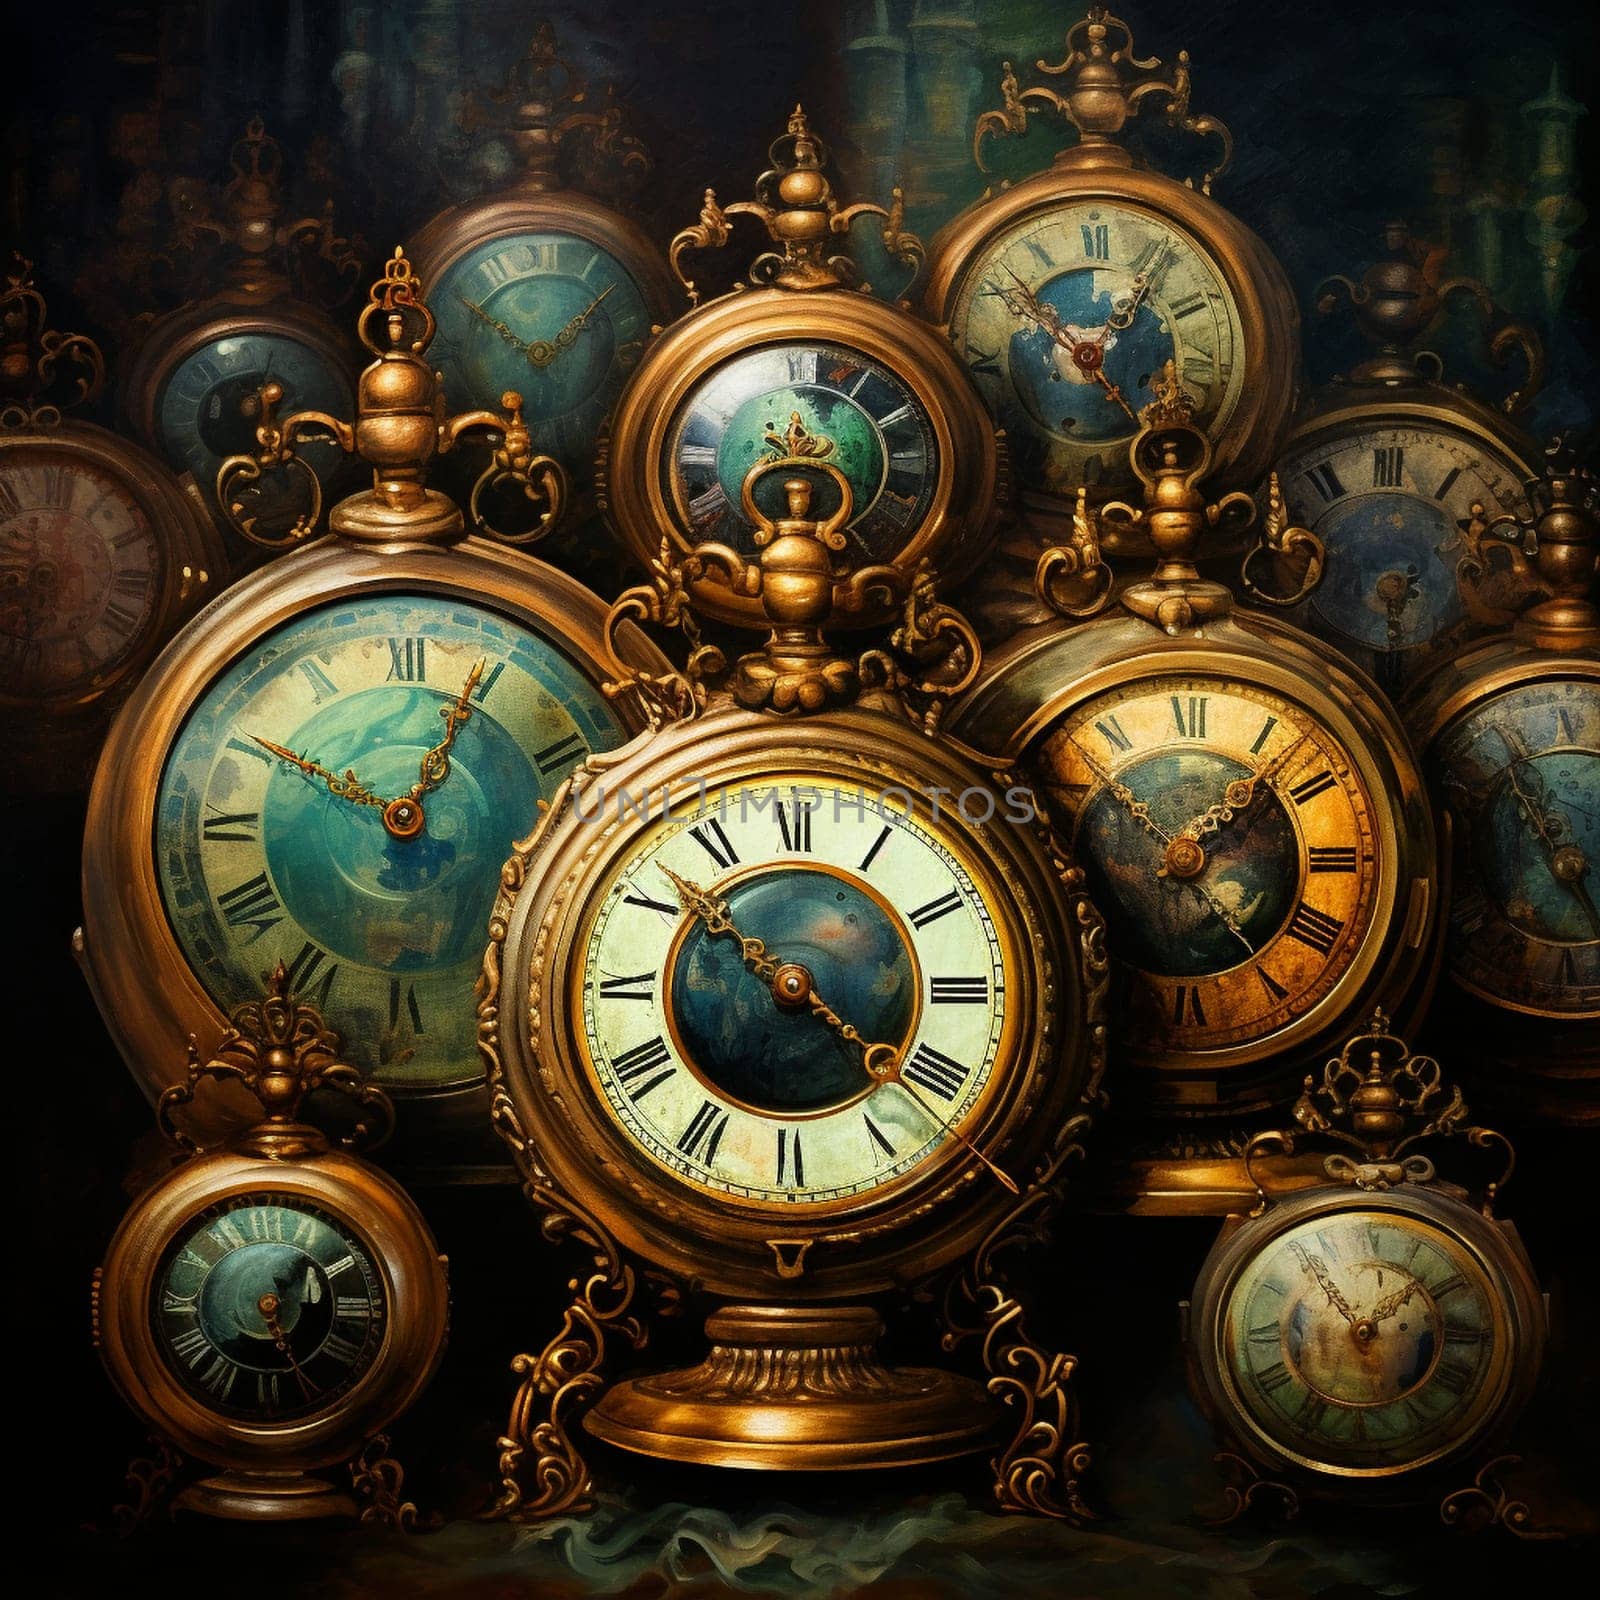 Nostalgic Beauty of Vintage Clocks in Oil Painting Art Style by Sahin